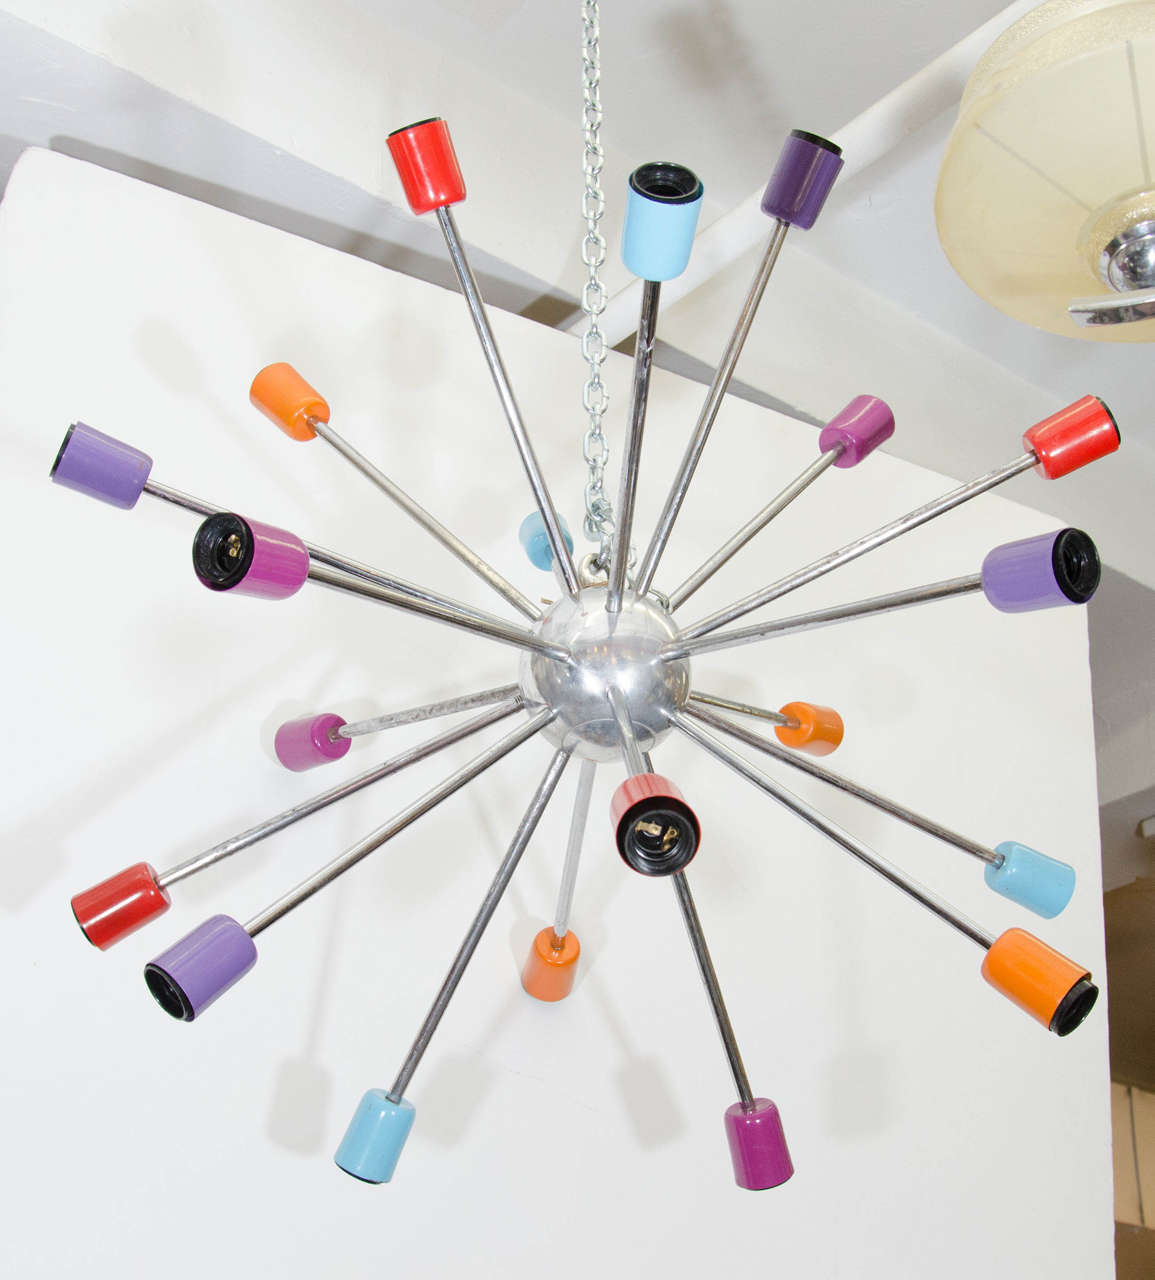 A vintage chrome Sputnik chandelier with multi-colored sockets in blue, purple, red, and orange.  European sockets and wiring.  Vintage condition with a fair amount of rust.